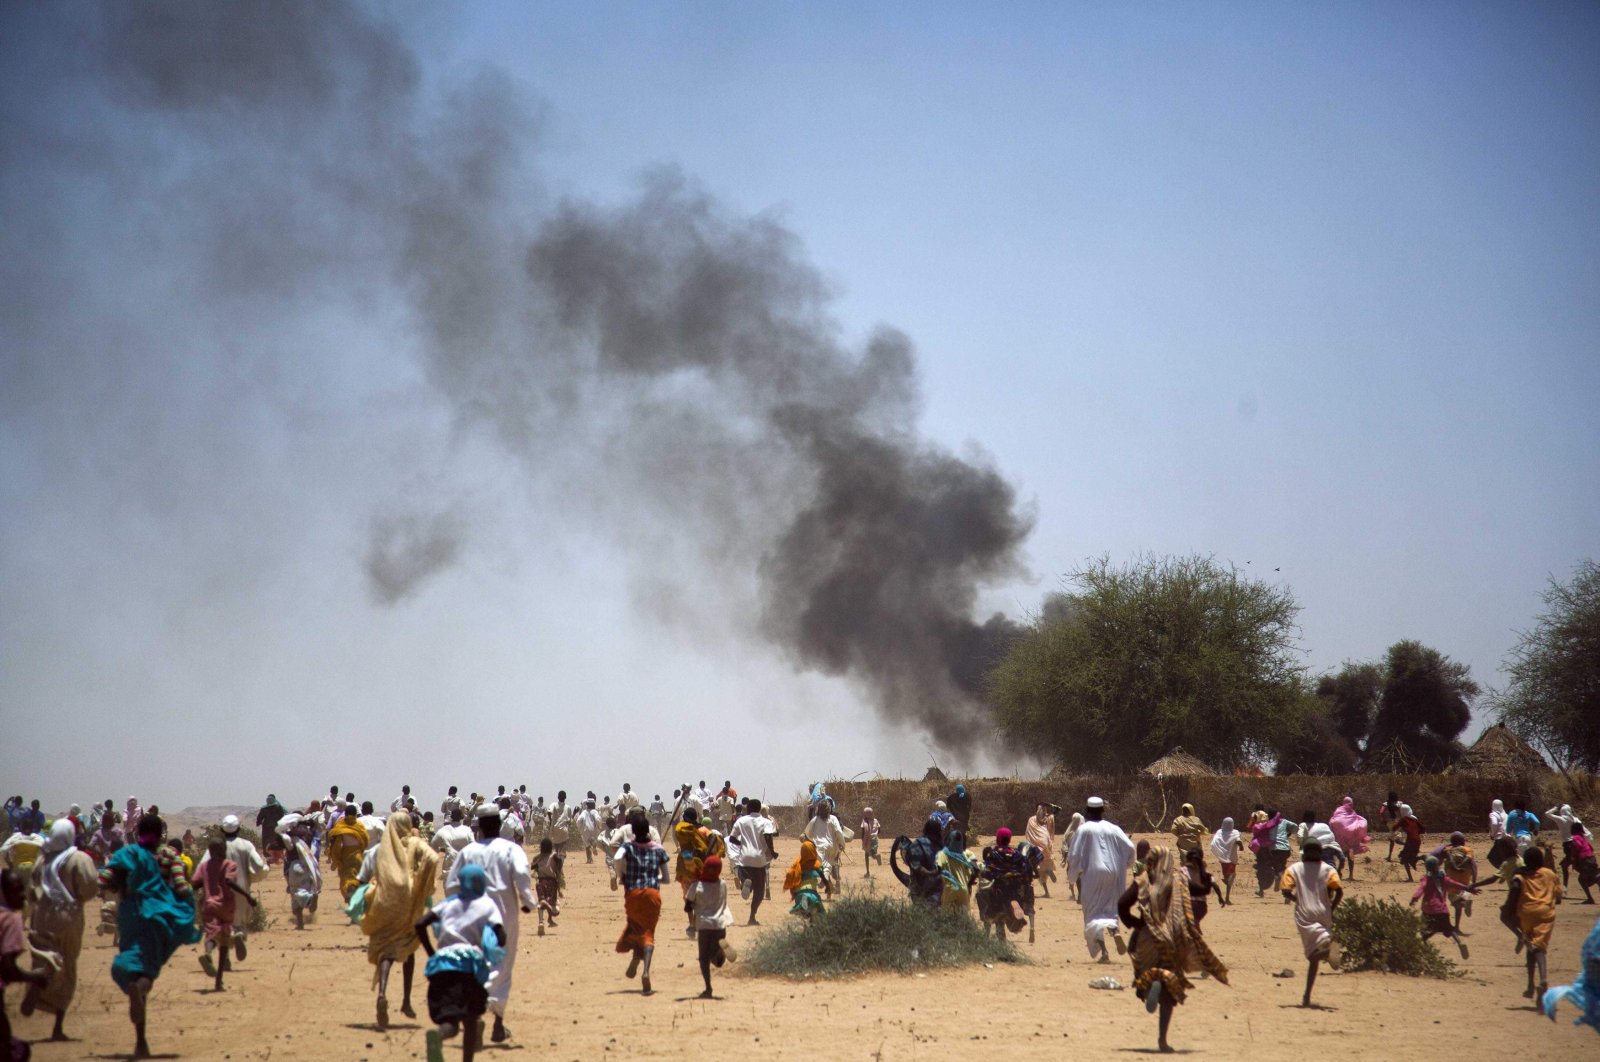 Villagers run away with their belongings from a fire in Kuma Garadayat, a village located in North Darfur, Sudan, May 19, 2011. (Reuters Photo)